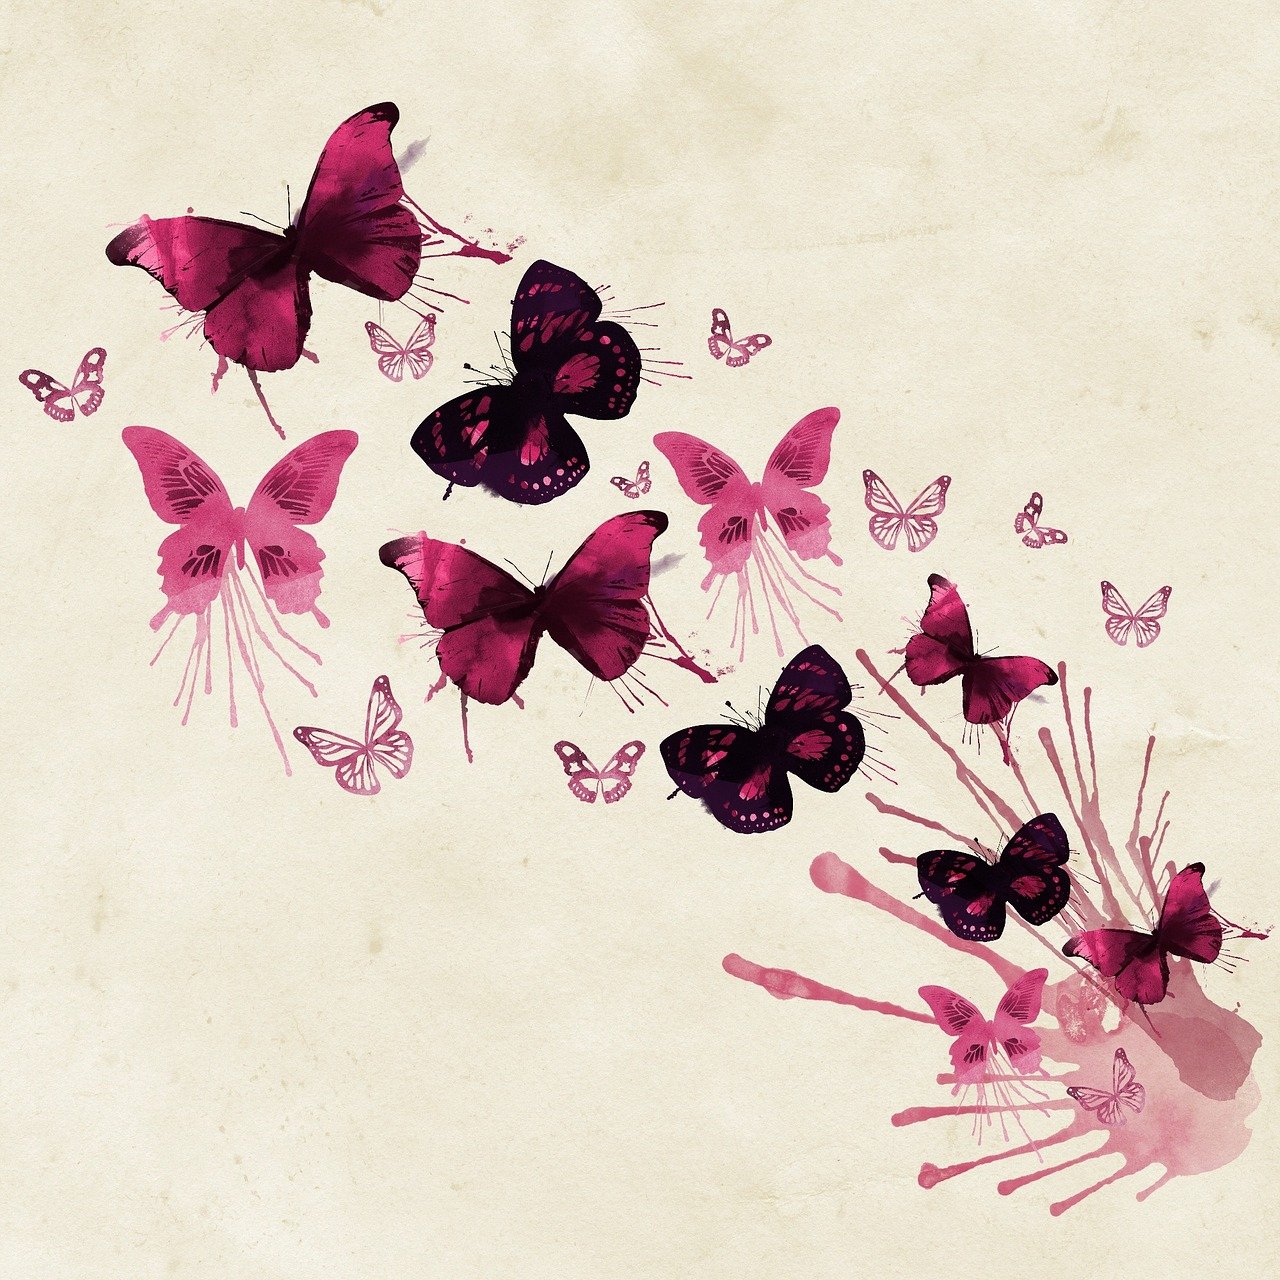 a bunch of butterflies that are flying in the air, concept art, by Nathan Wyburn, flickr, magenta colours, ink drips, vintage style, society 6